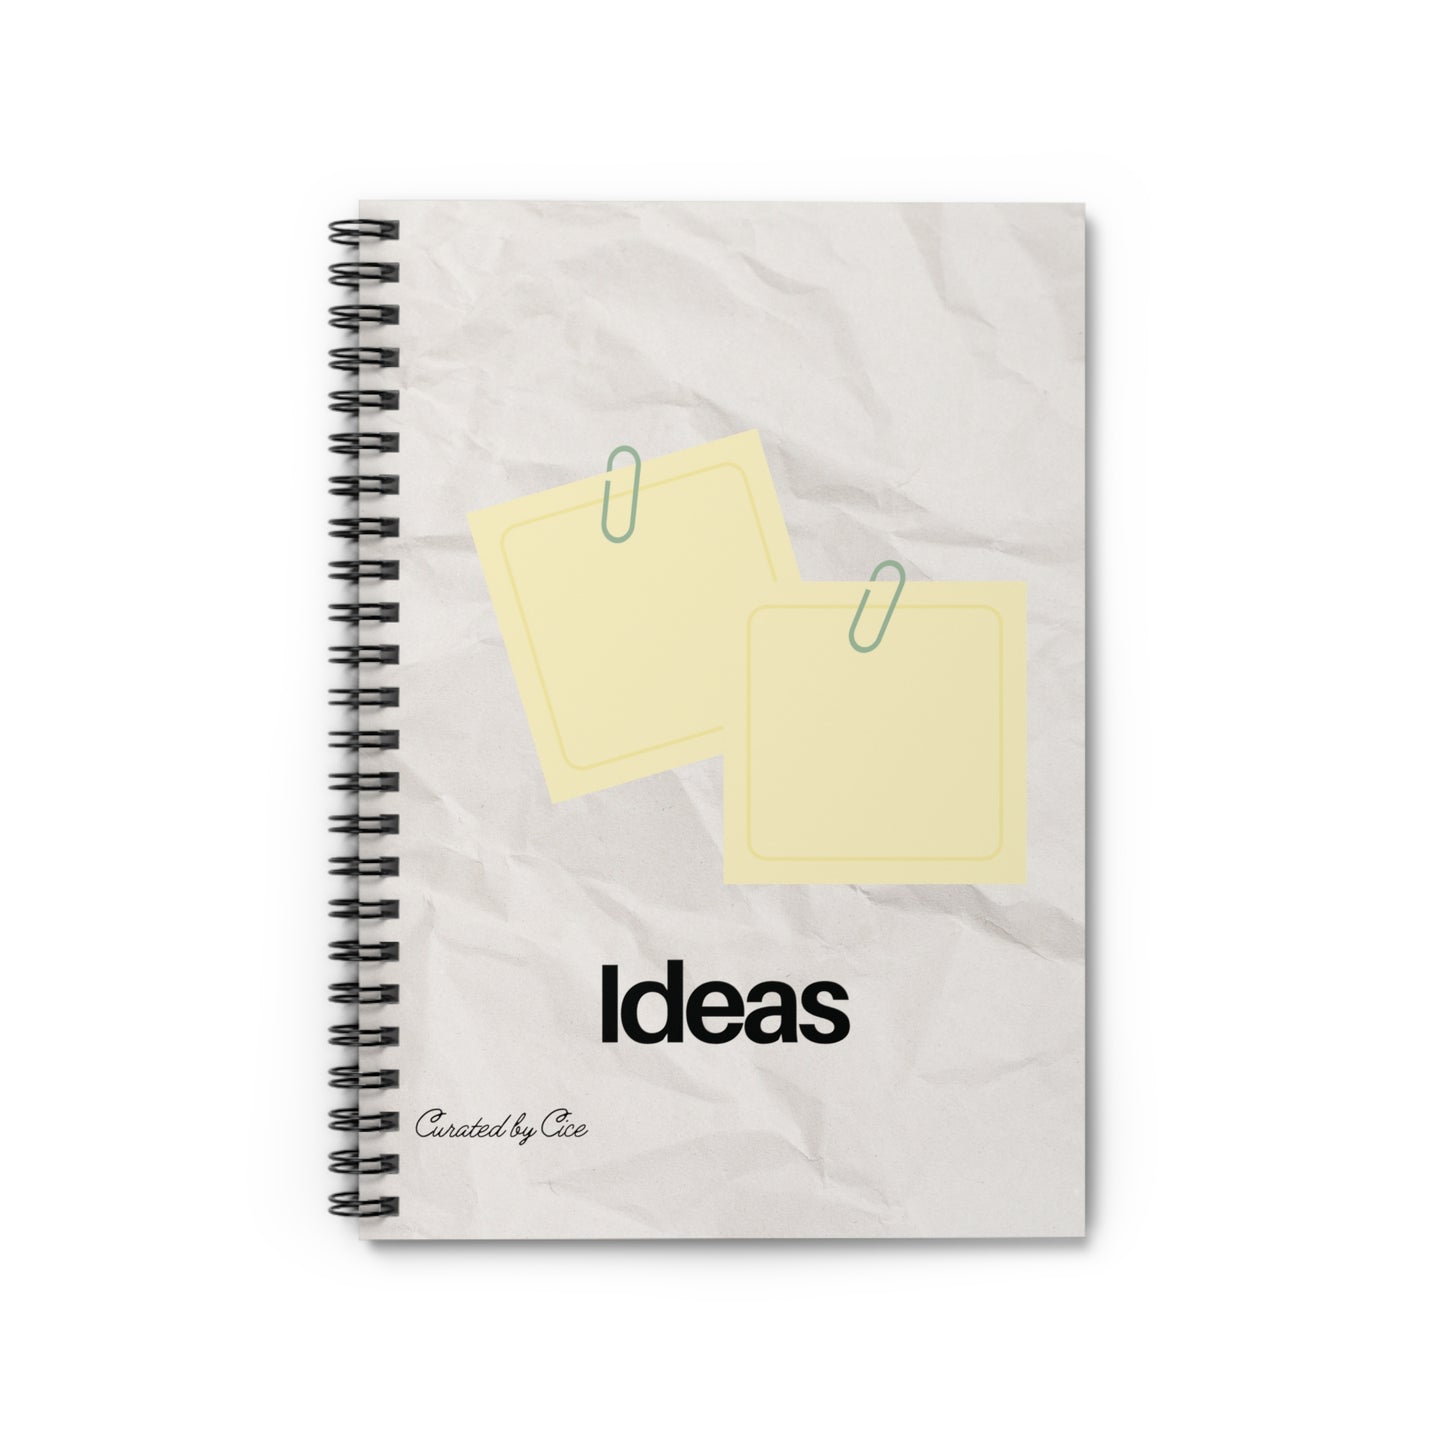 Posted Ideas Journal & Notebook